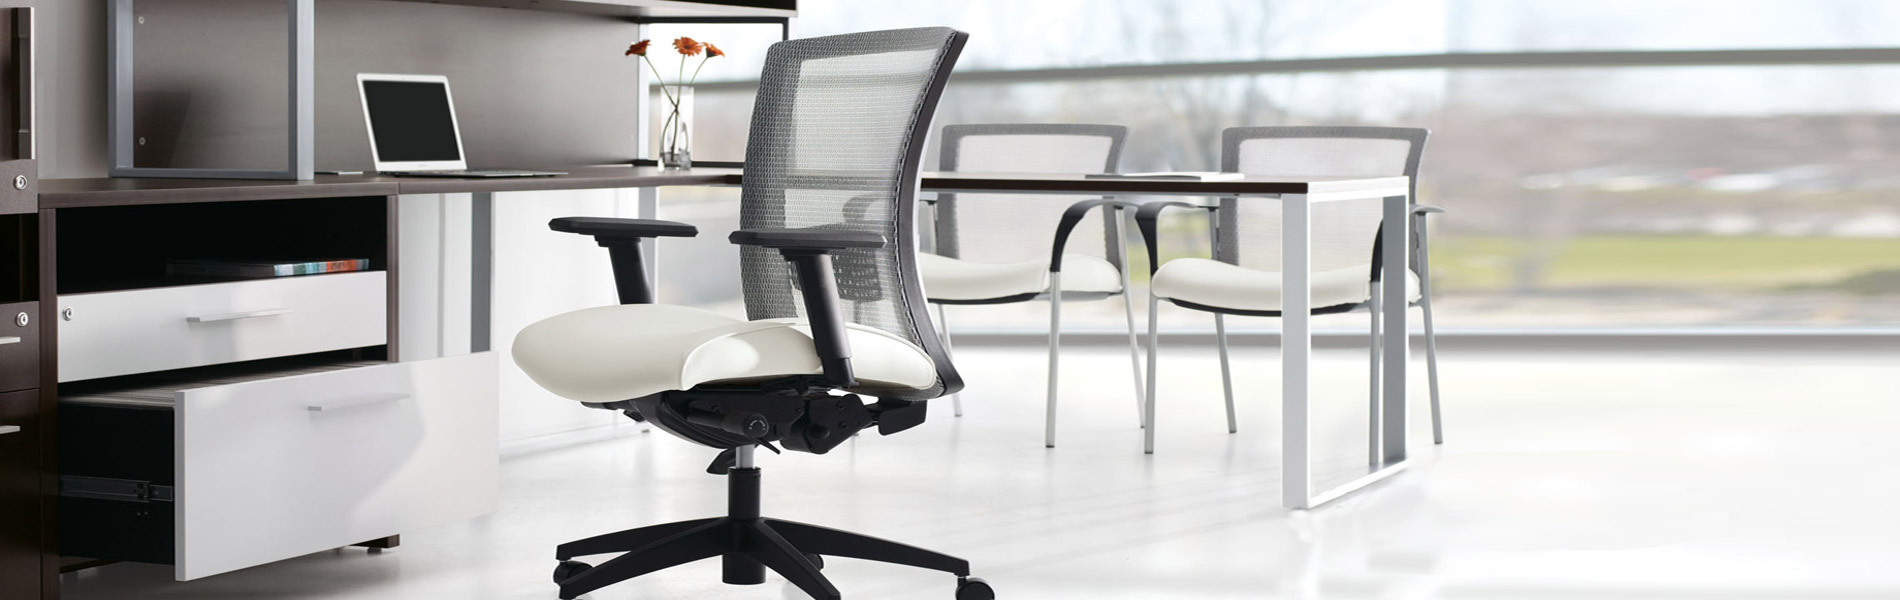 Big and Tall Office Chairs - Big and Tall Desk Chairs | 500 lb Capacity ...